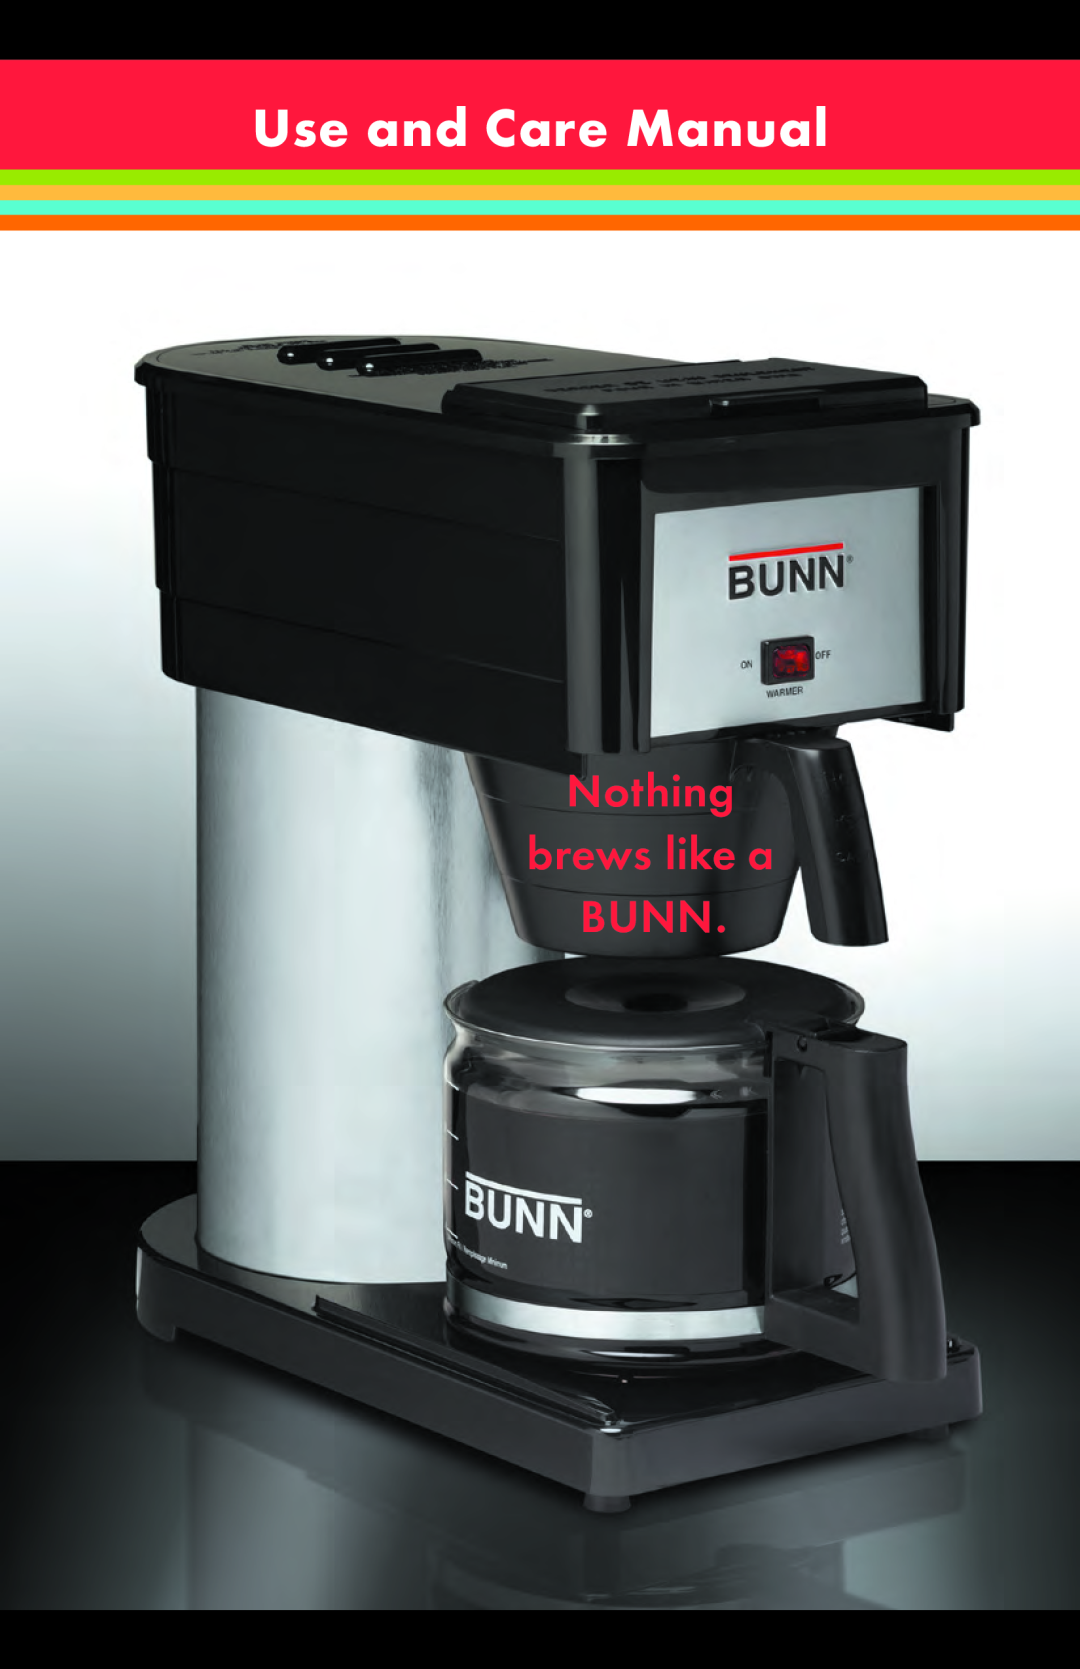 Bunn manual Use and Care Manual, Nothing brews like a BUNN, For use with BX-B, BX-W, GRX-B, GRX-W 